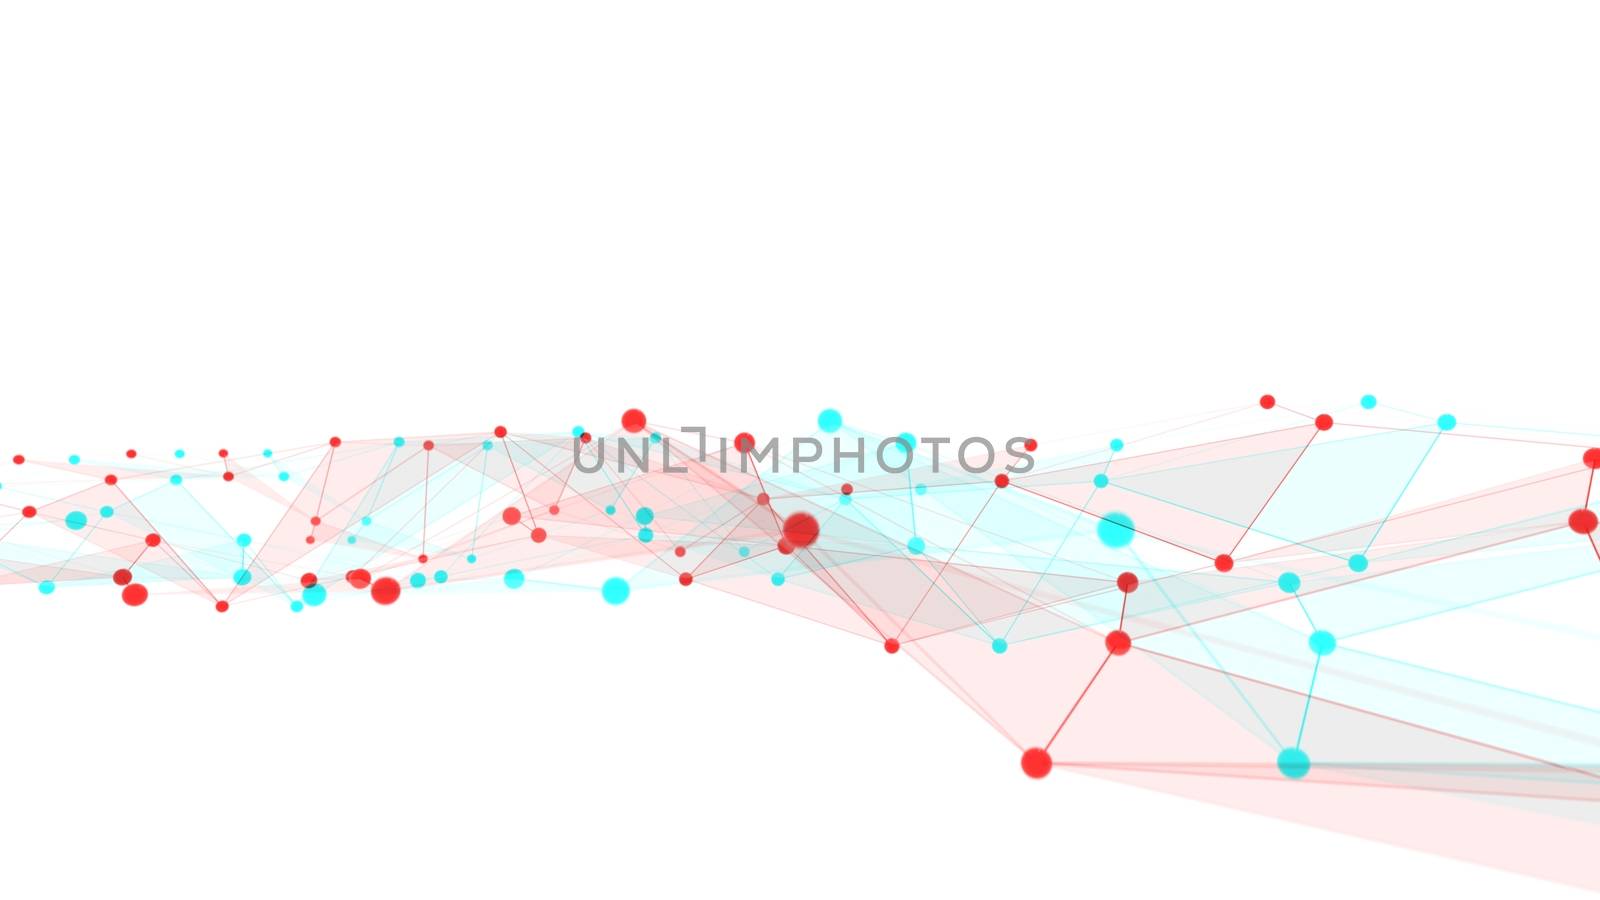 Concept of networks, science, technology or business. The points are connected by lines and transparent triangles. Large data array. 3d illustration with anaglyph effect